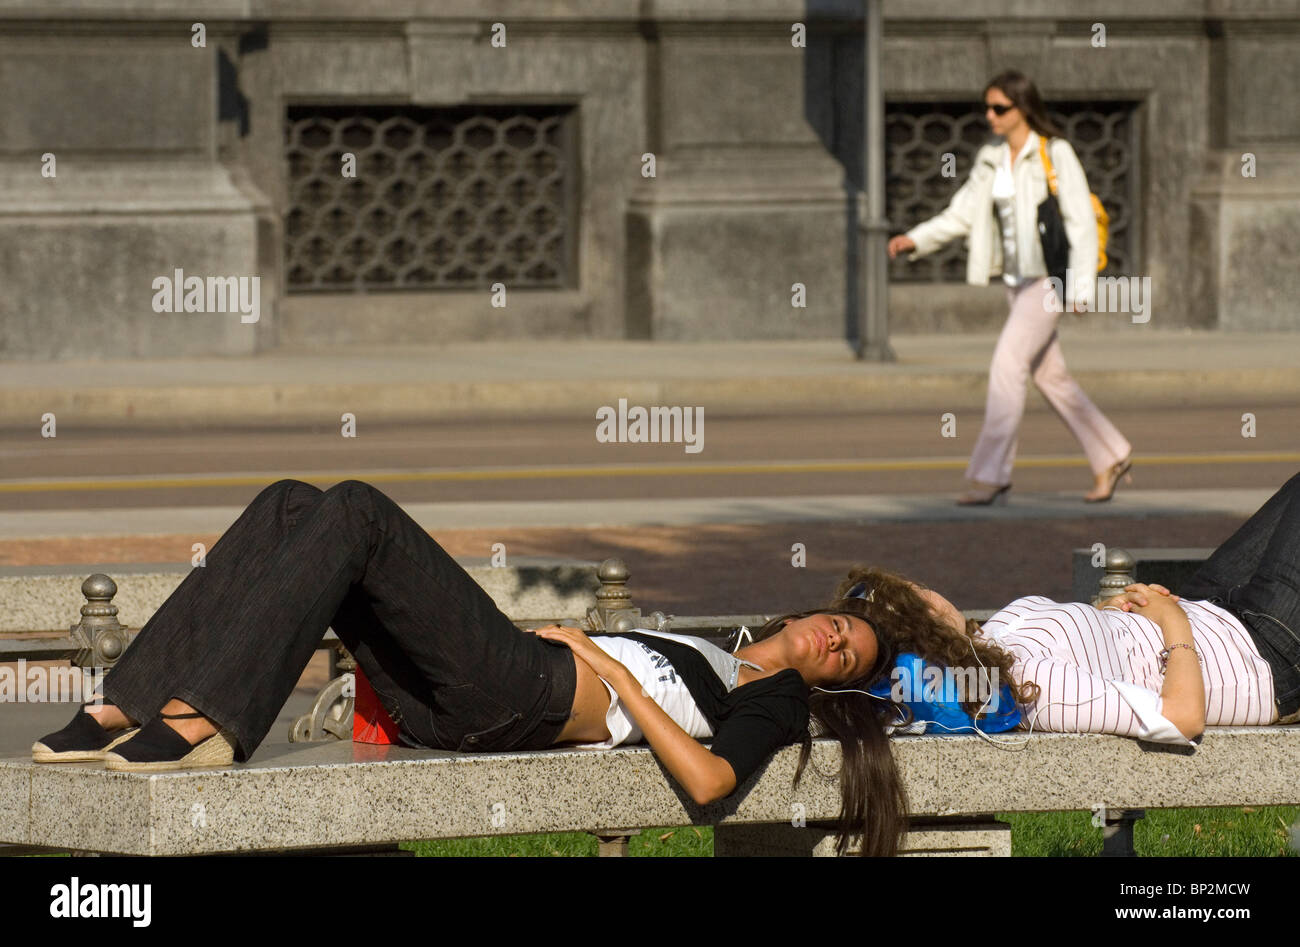 Young girls relaxing on a bench and listening to music, Milan, Italy Stock Photo